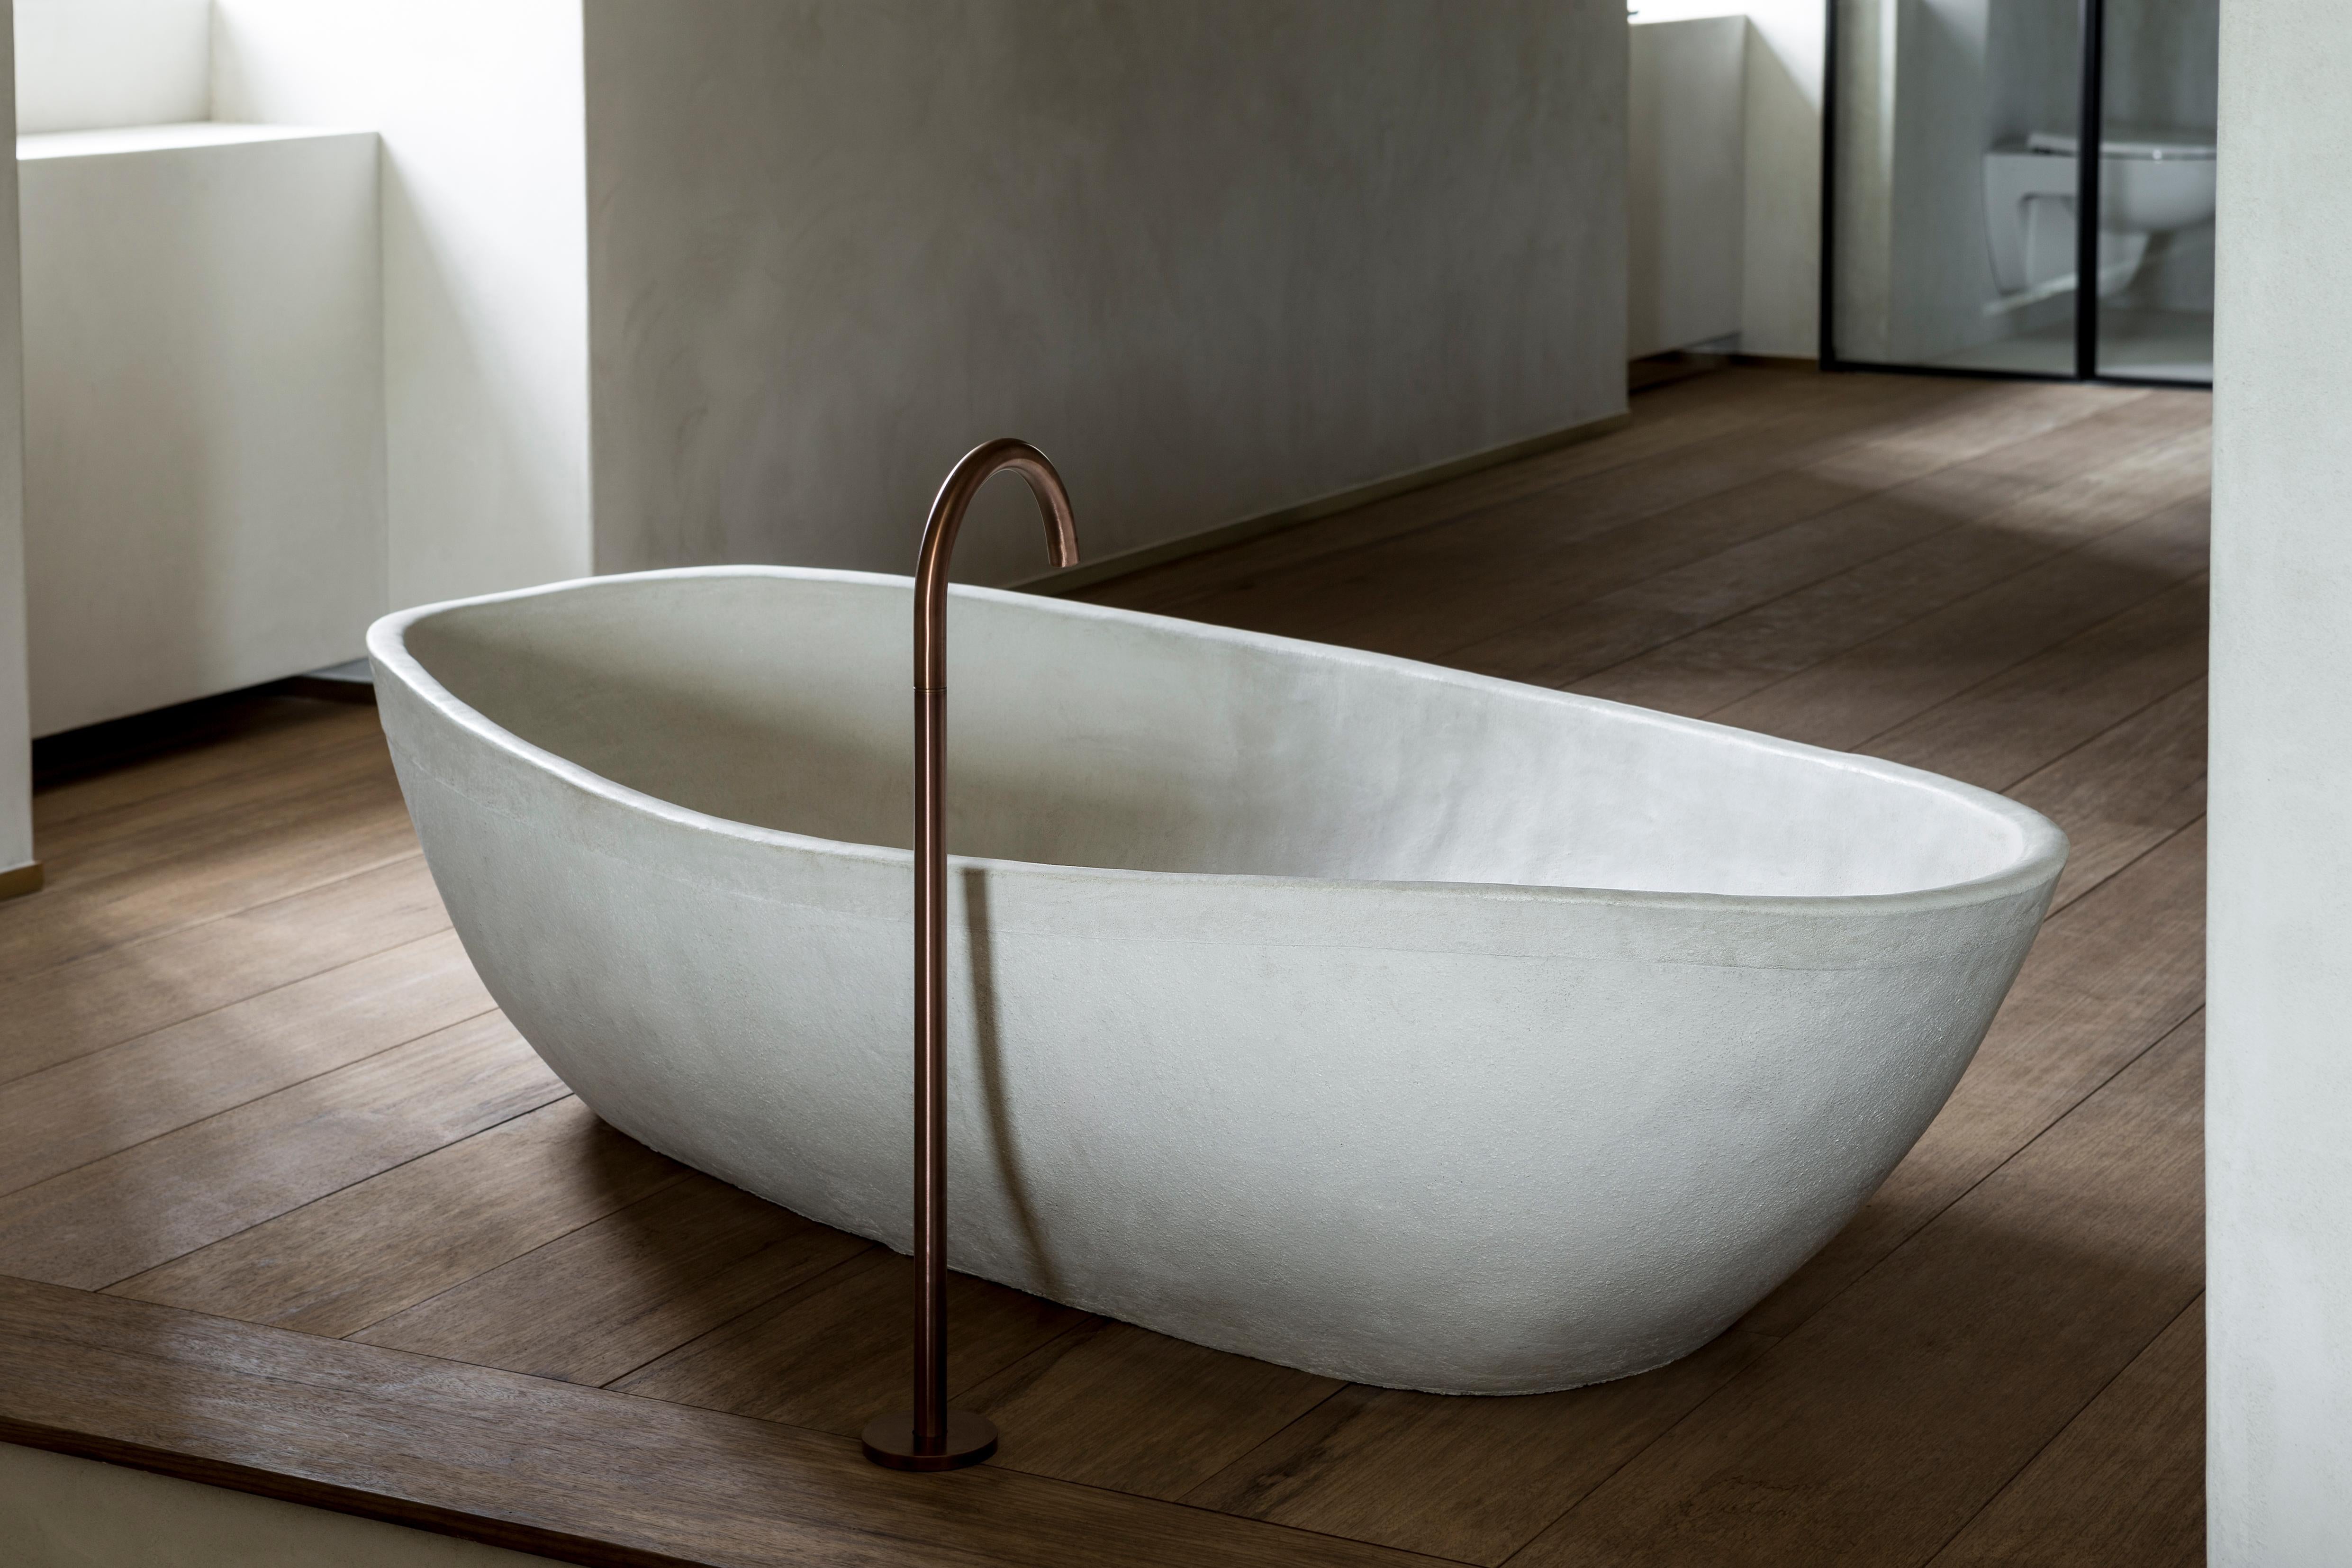 Large clay bathtub by Studio Loho
Dimensions: D 90 x W 160-165 x H 42 cm
Materials: clay
Other colors and raw or smooth exterior available.
Available in 4 sizes: W 160 x H 42(Large), W 160 x H 53(Large High), W 180 x H 42(X-Large), W 190 x H